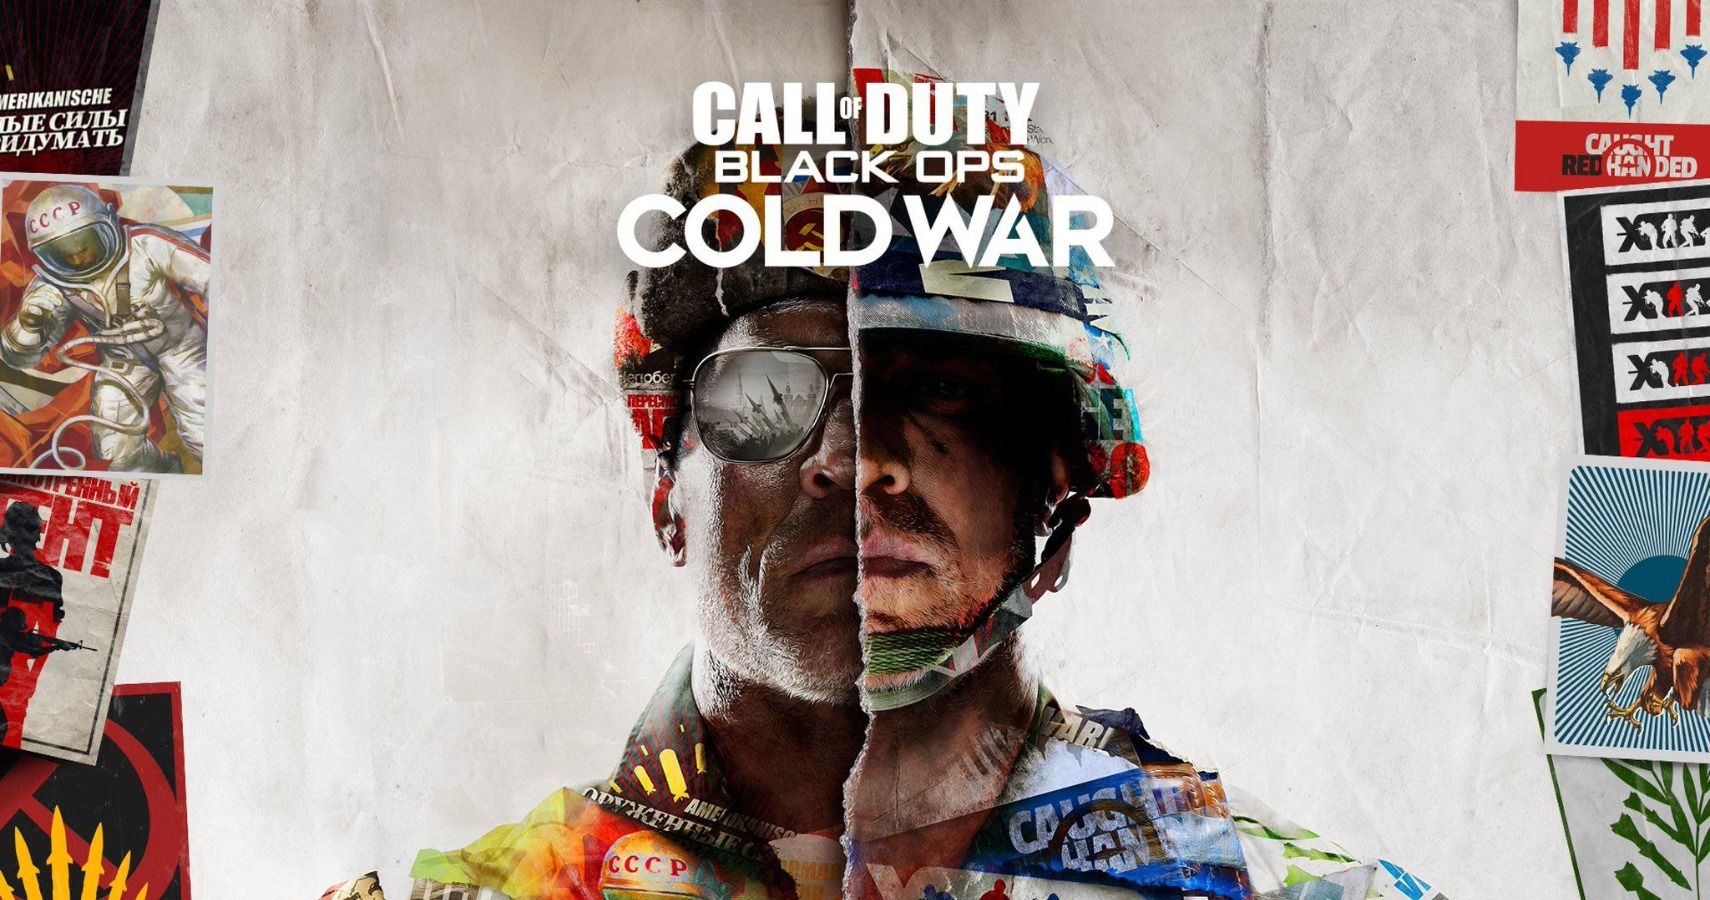 Call Of Duty Black Ops Cold War Beta Impressions  With Some Tweaks It Could Be The Best COD In Years